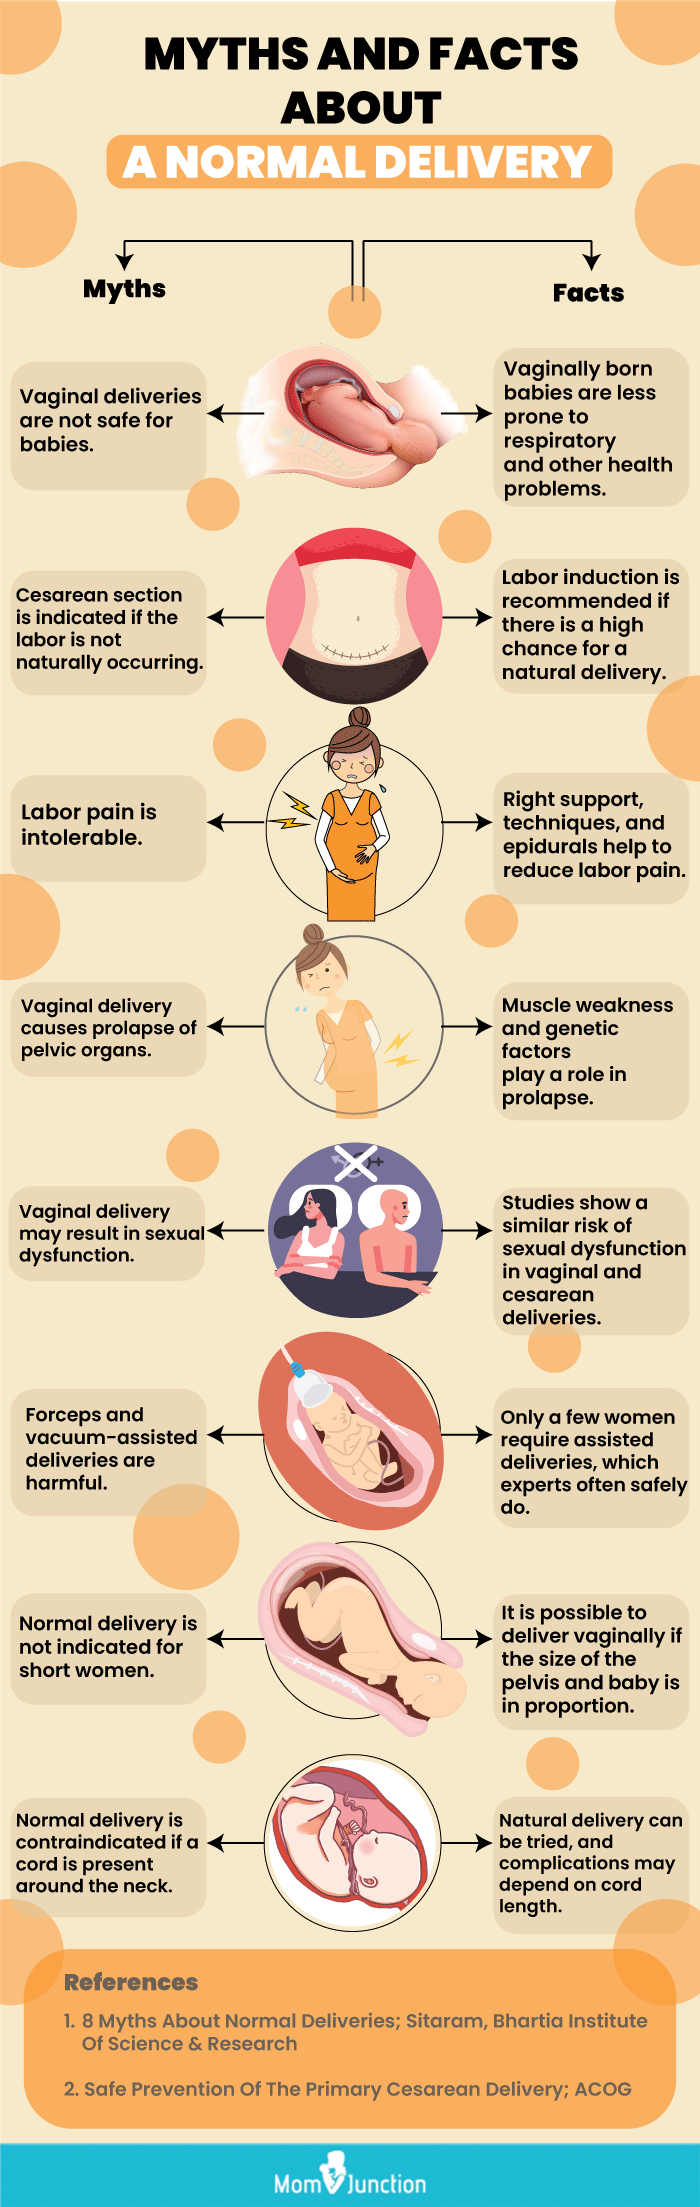 39 Weeks Pregnant Ways To Induce Labor